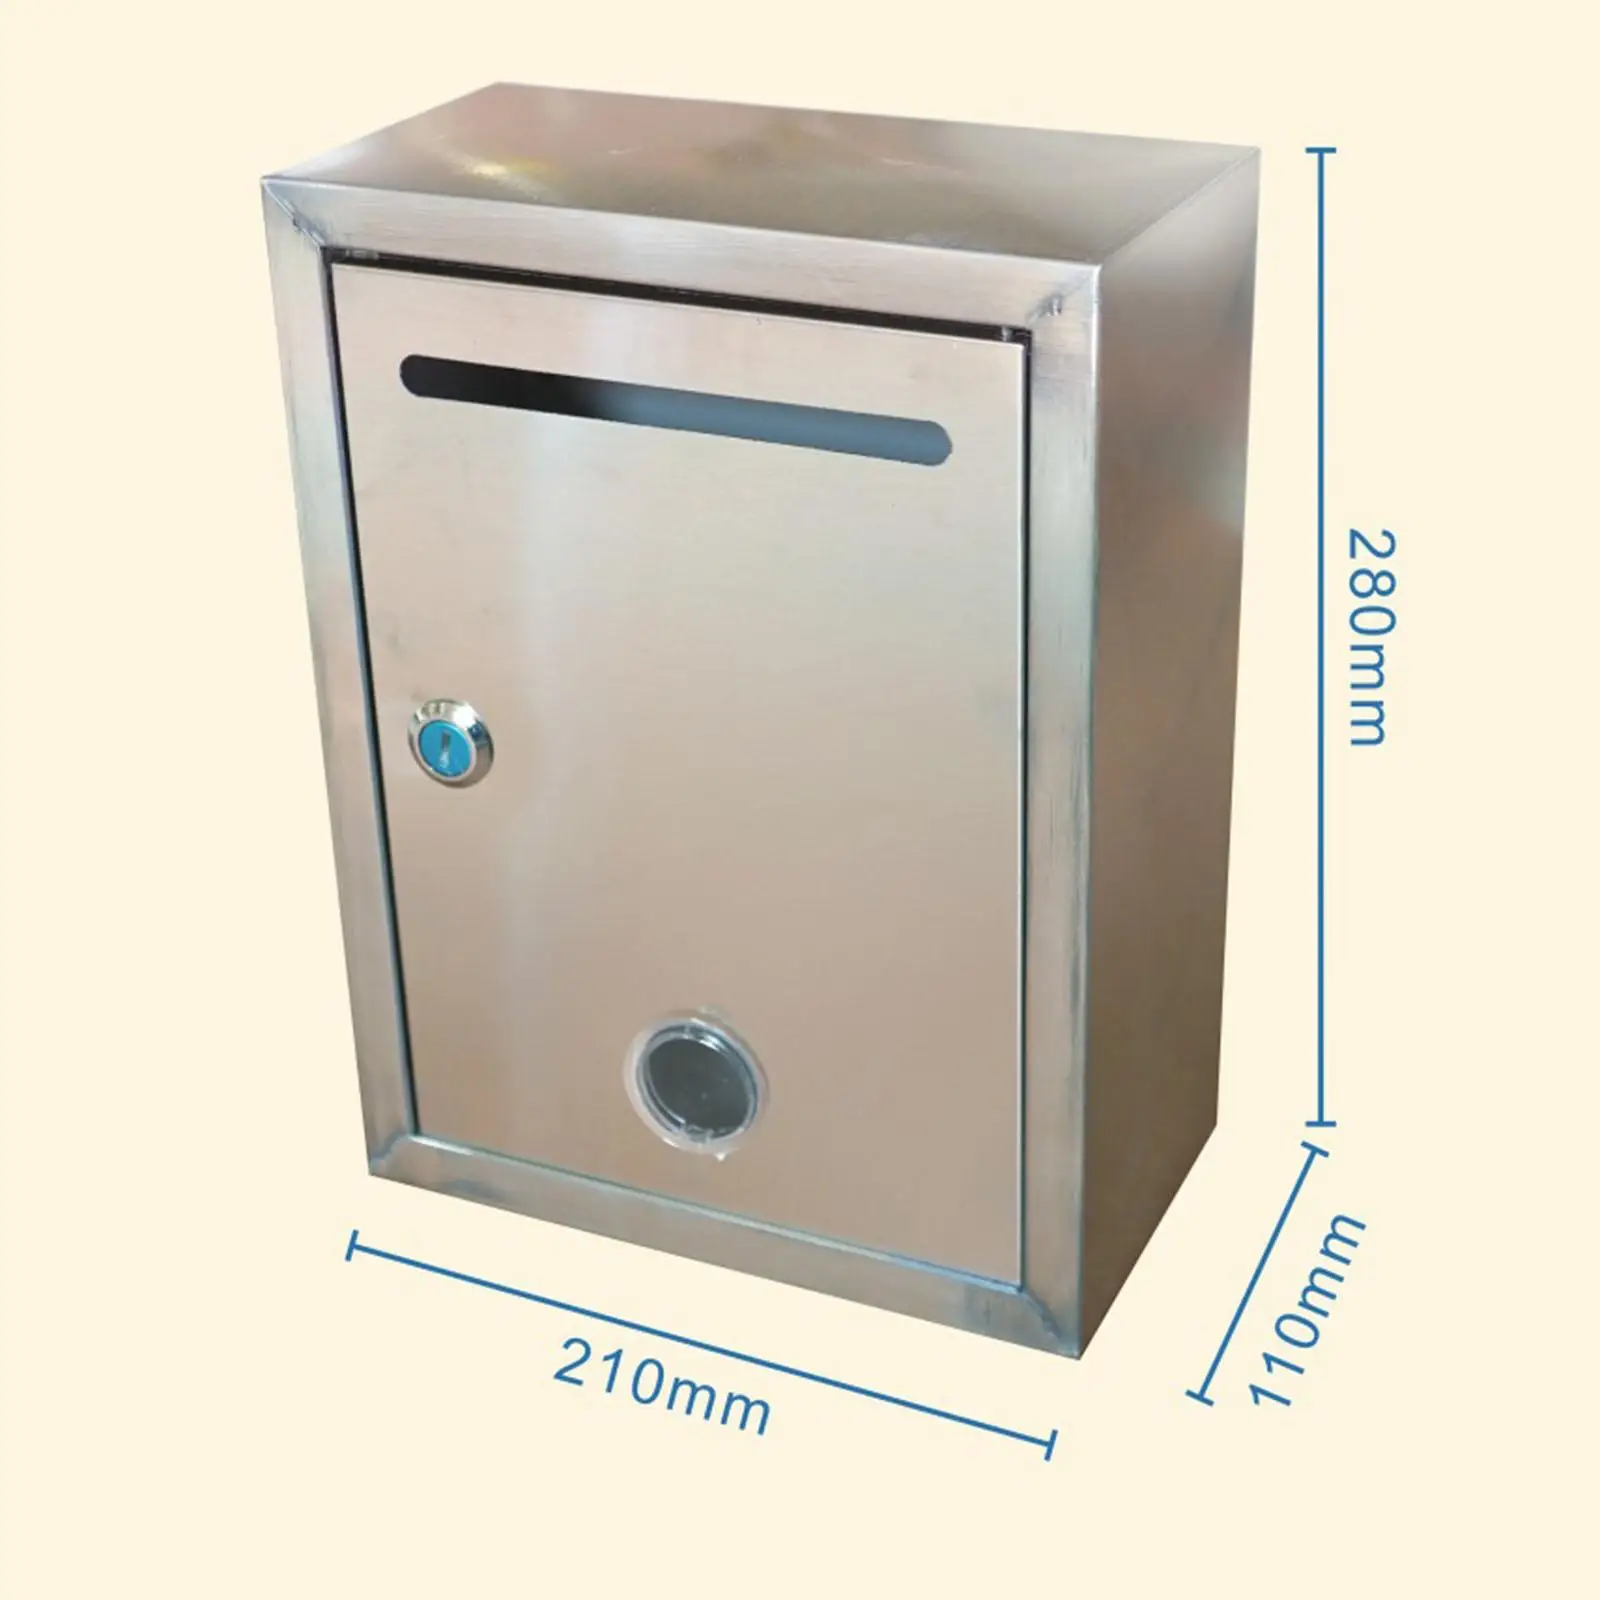 Suggestion Box with Lock Metal Ballot Box for Suggestions Voting Fundraising